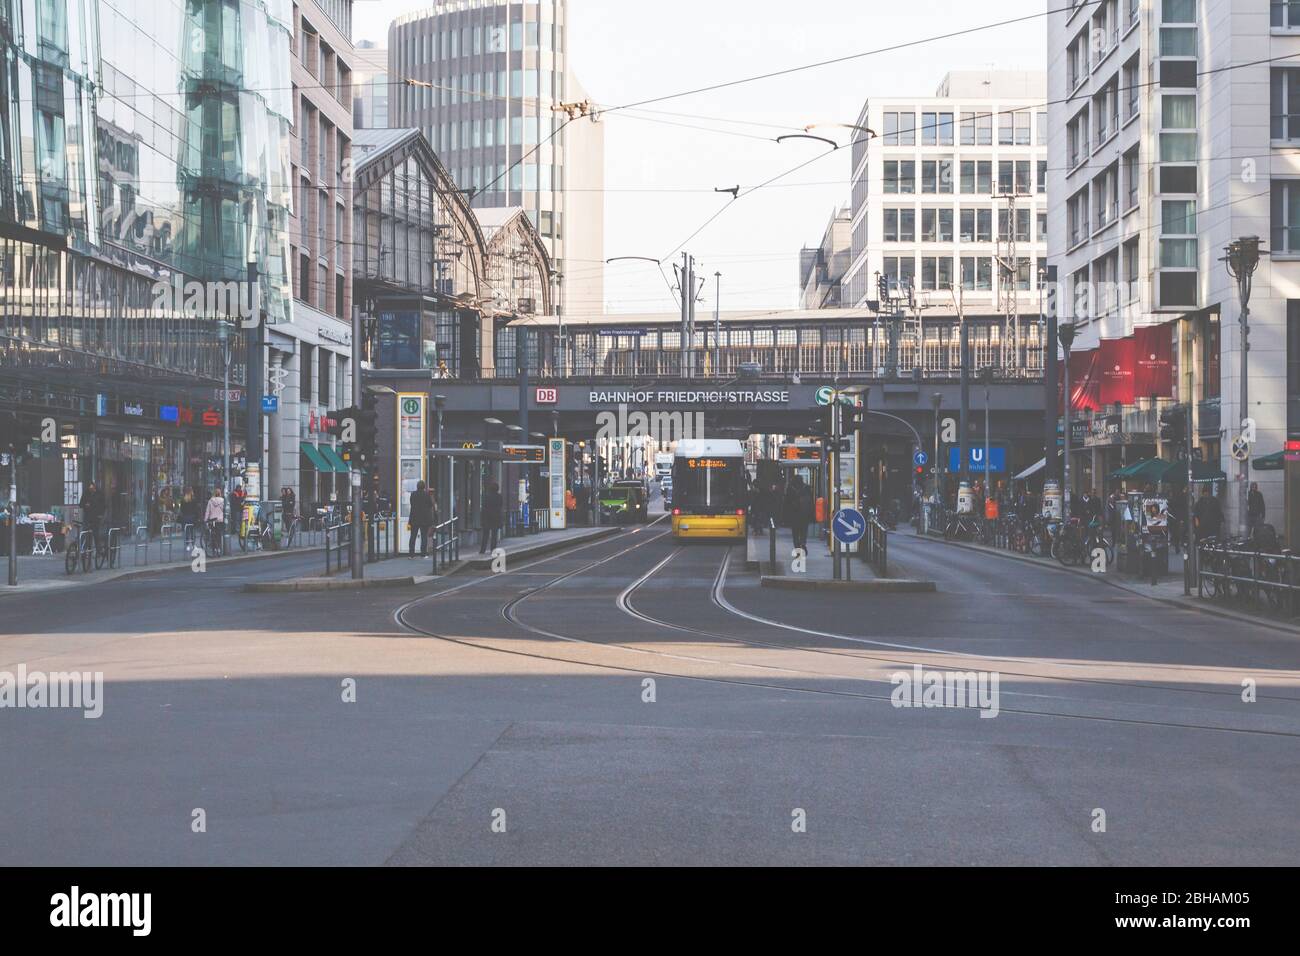 Berlin Friedrichstrasse - train station and urban street scene - editorial use only. Stock Photo